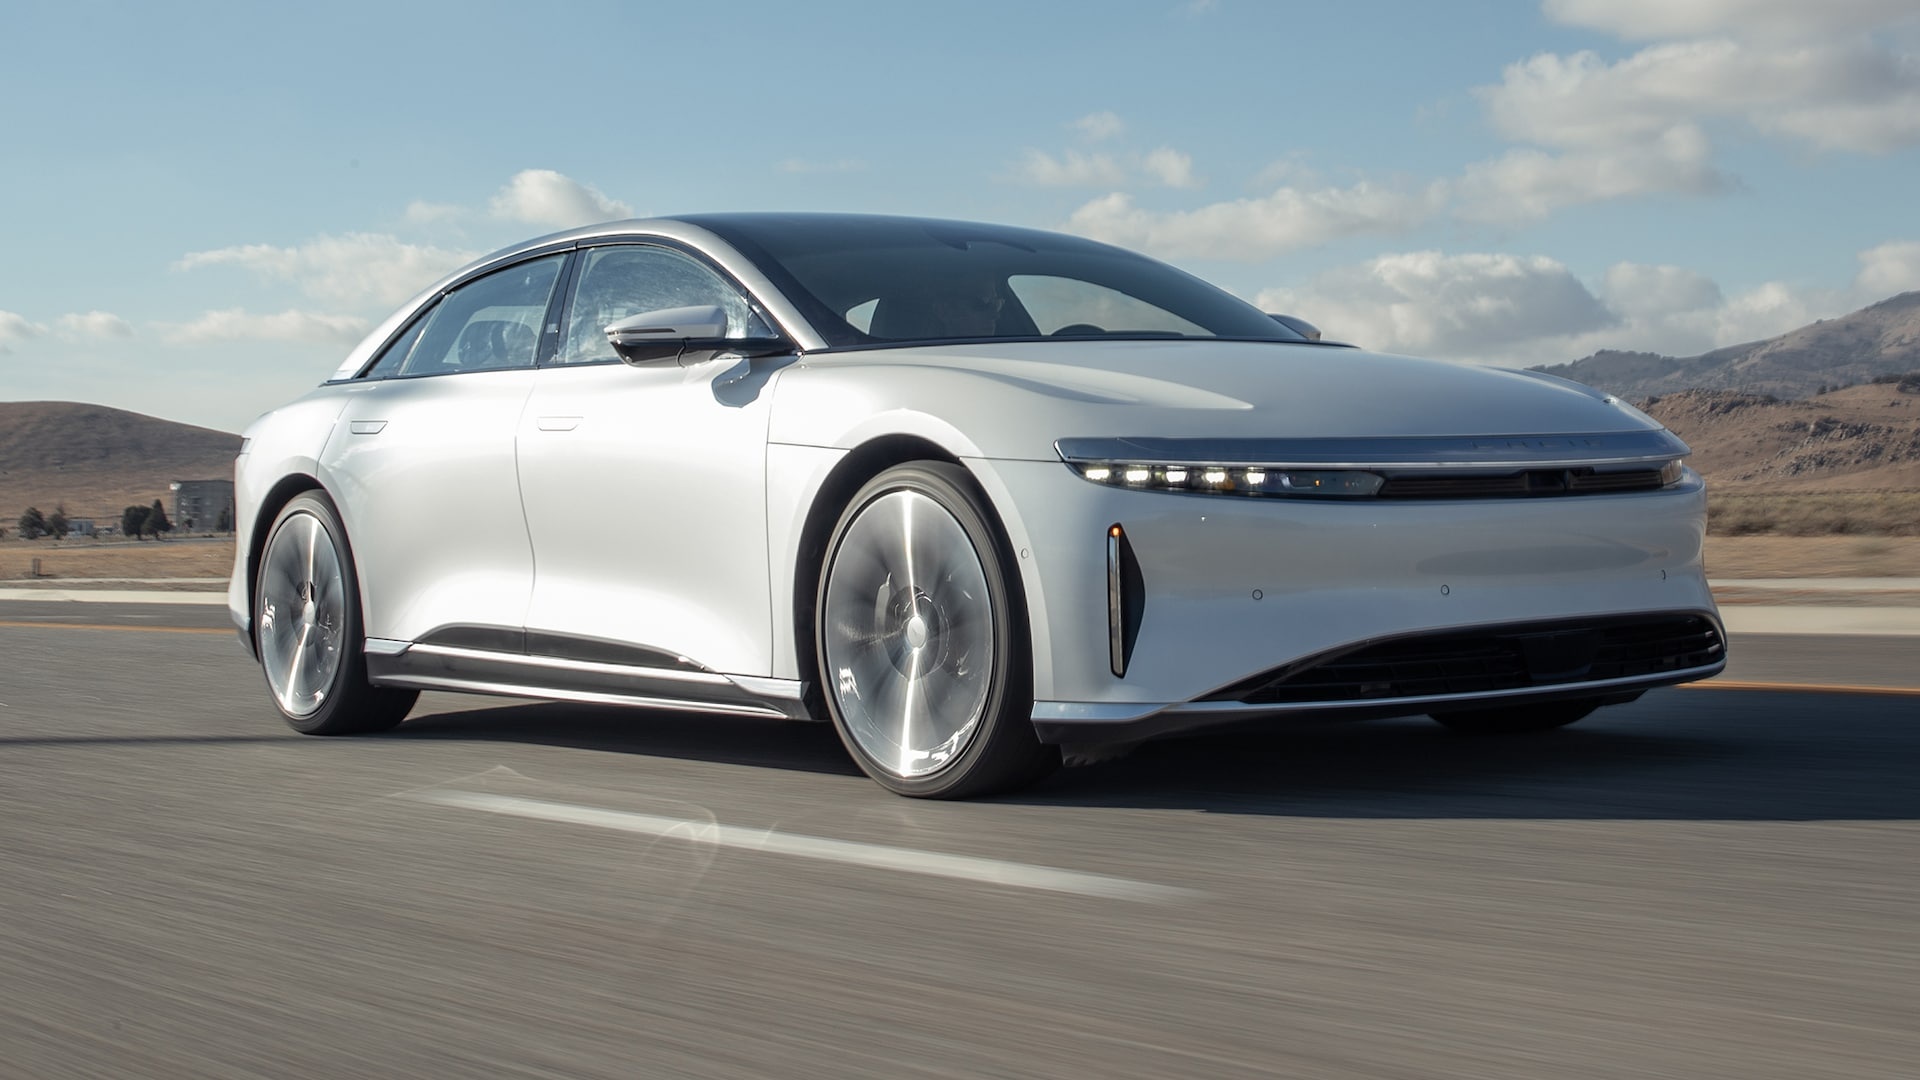 Lucid Motors Auto, Impressive range, Innovative features, Exciting driving experience, 1920x1080 Full HD Desktop